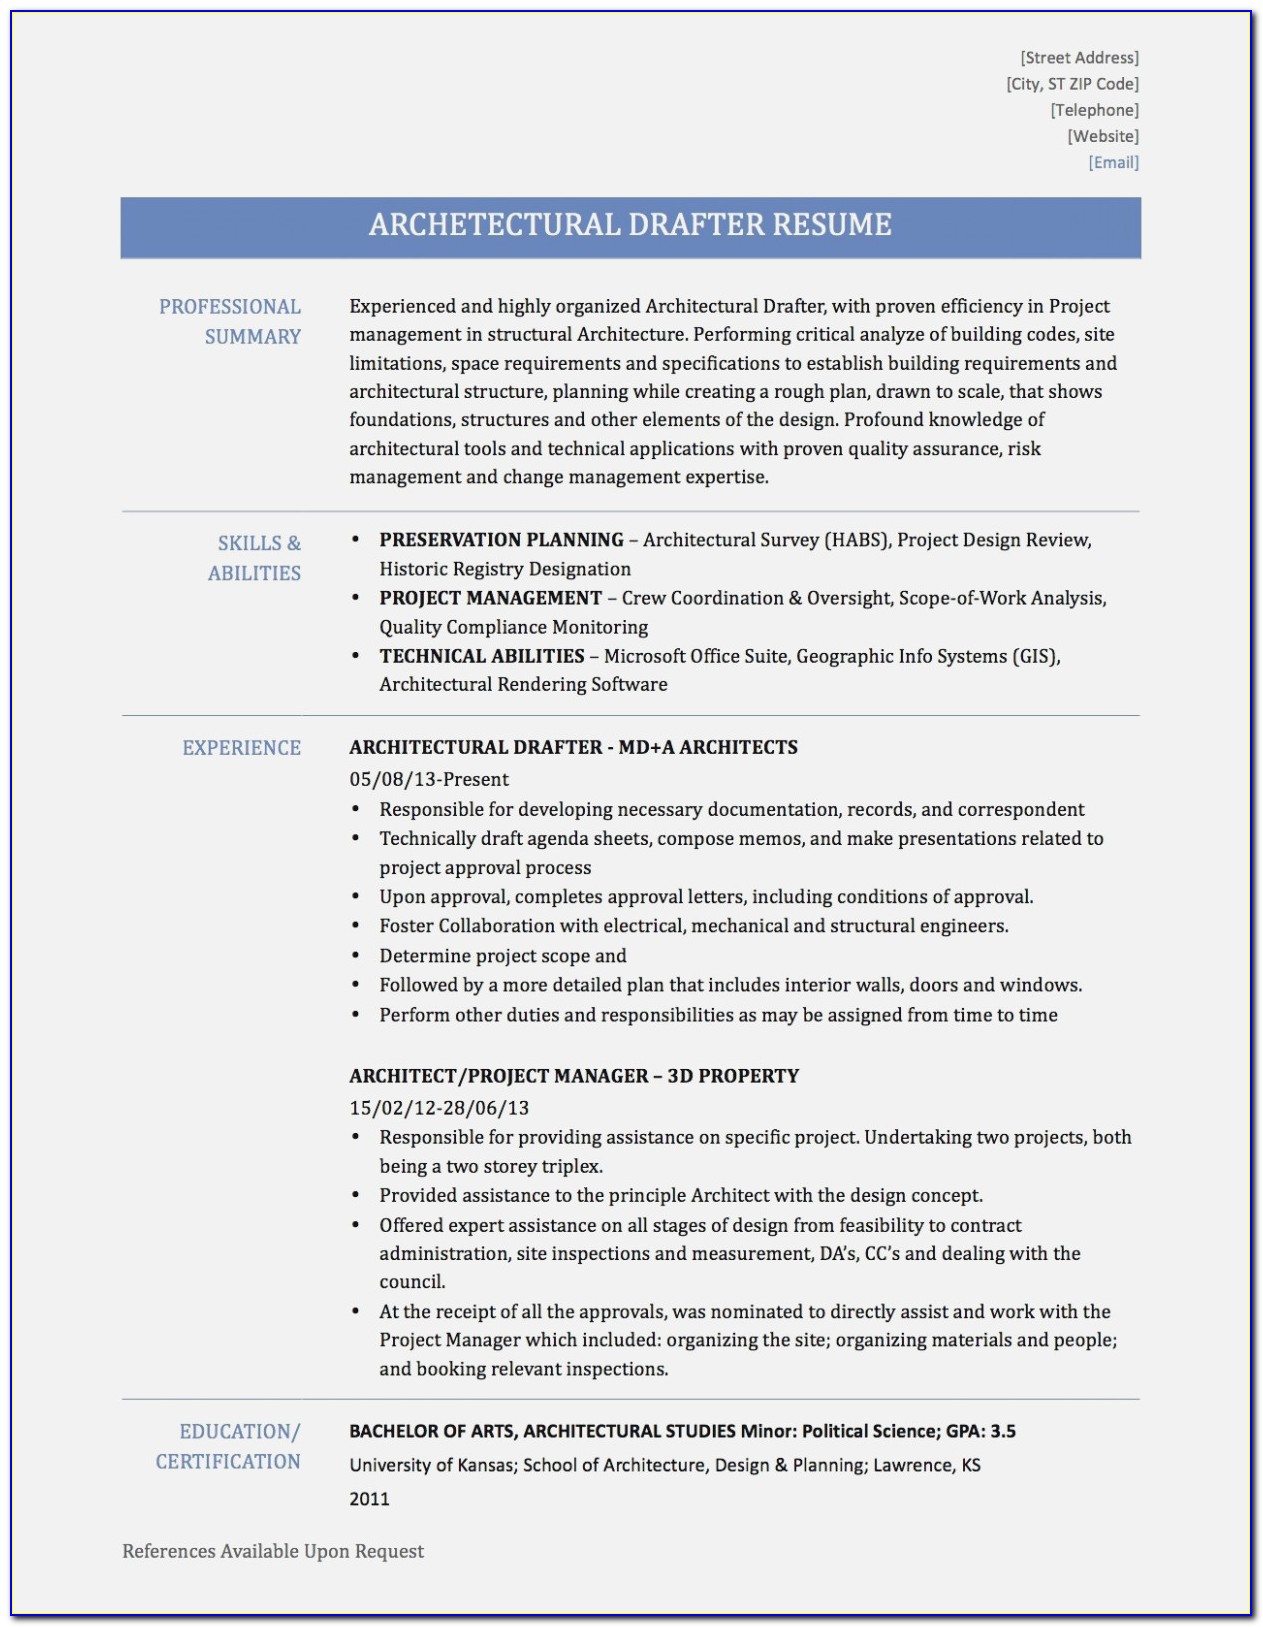 Architectural Drafter Resume Templates